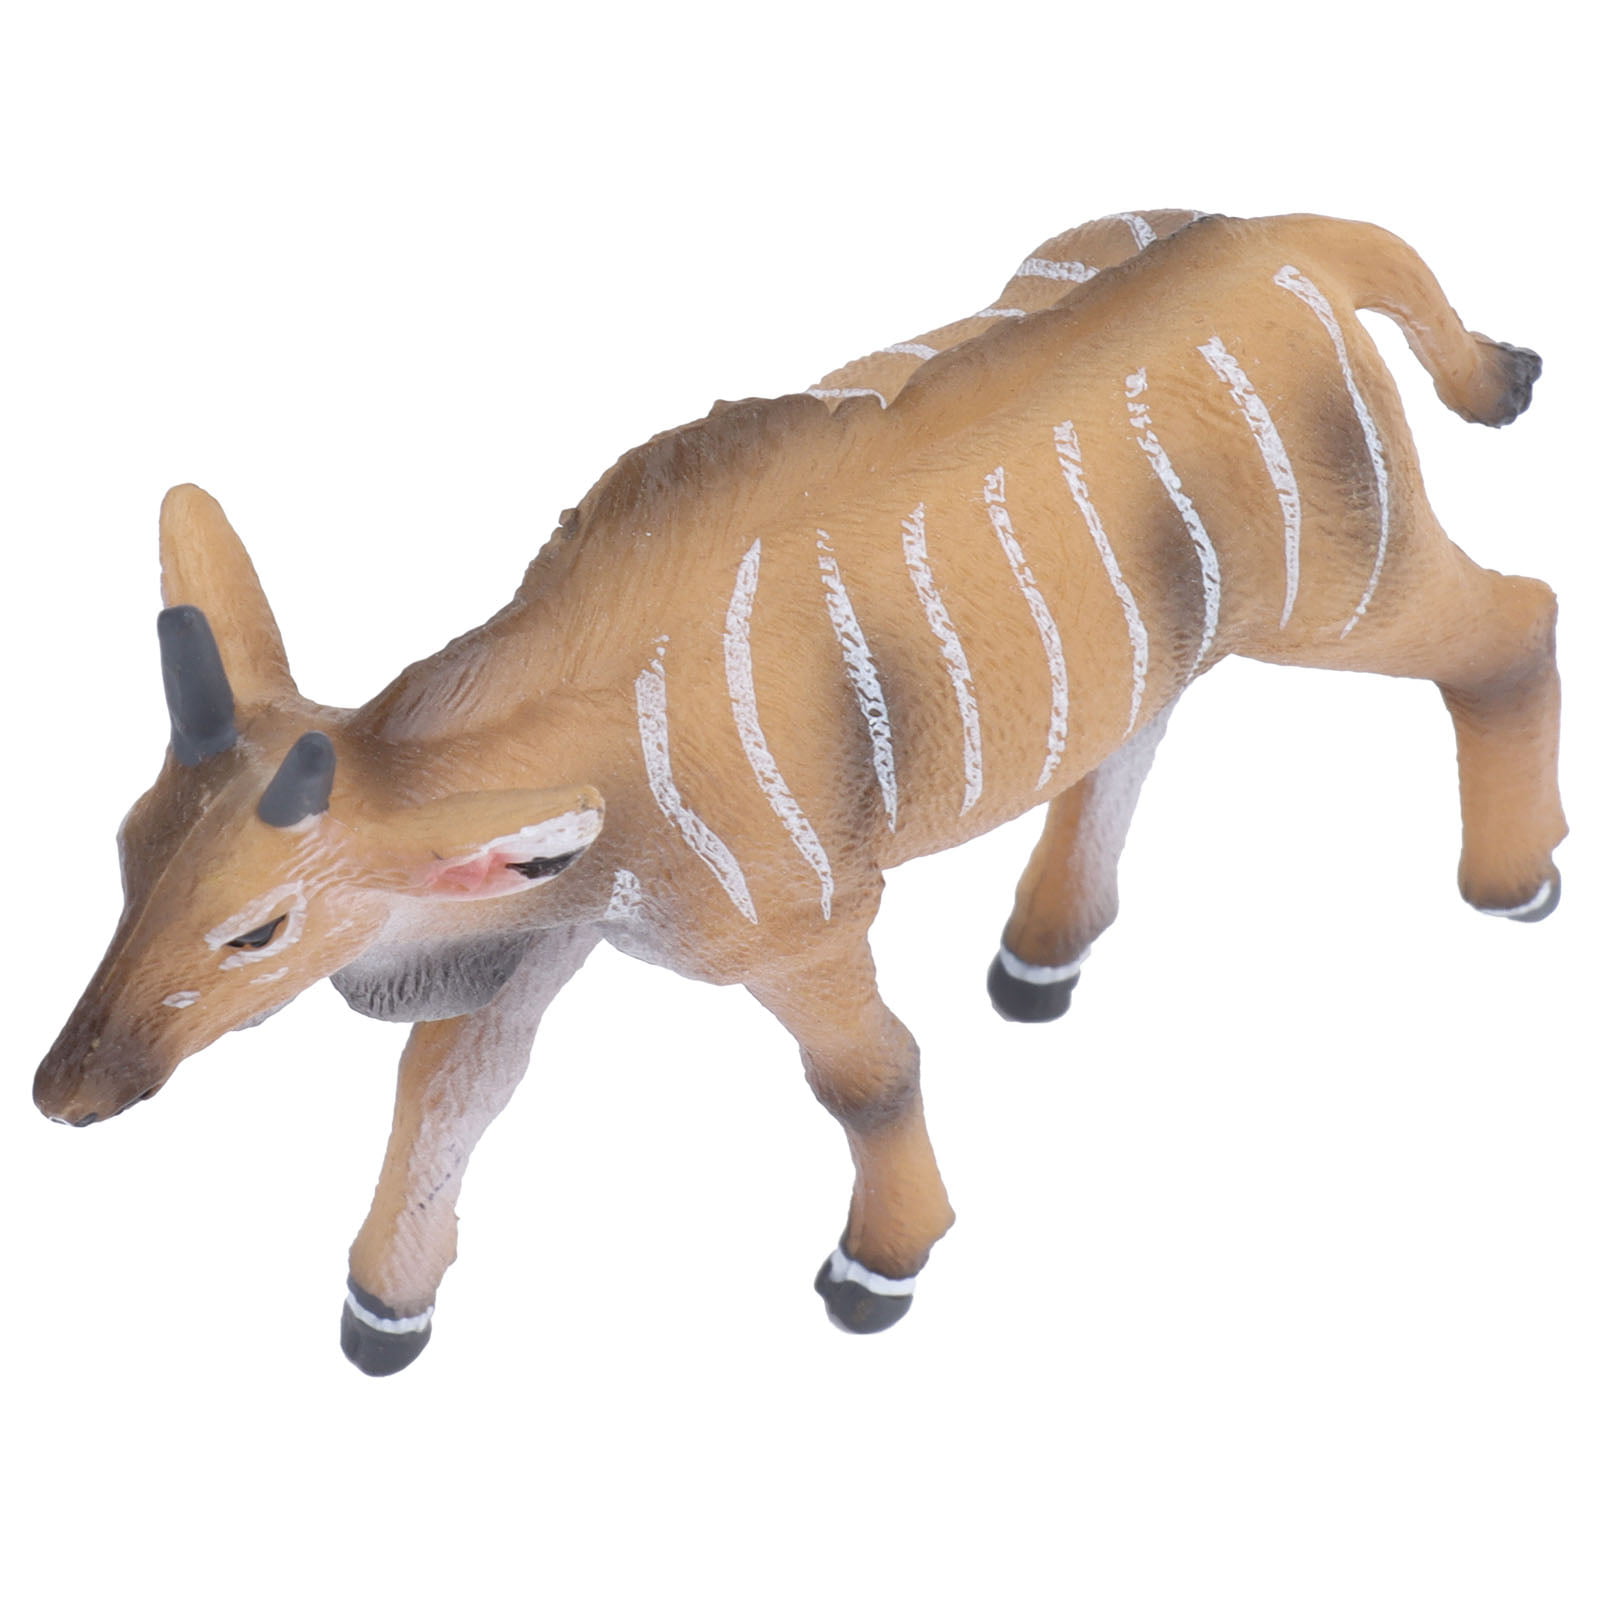 Simulation Plastic Forest Wild Animals Modeling Toy Figurine Home Decor Antelope 